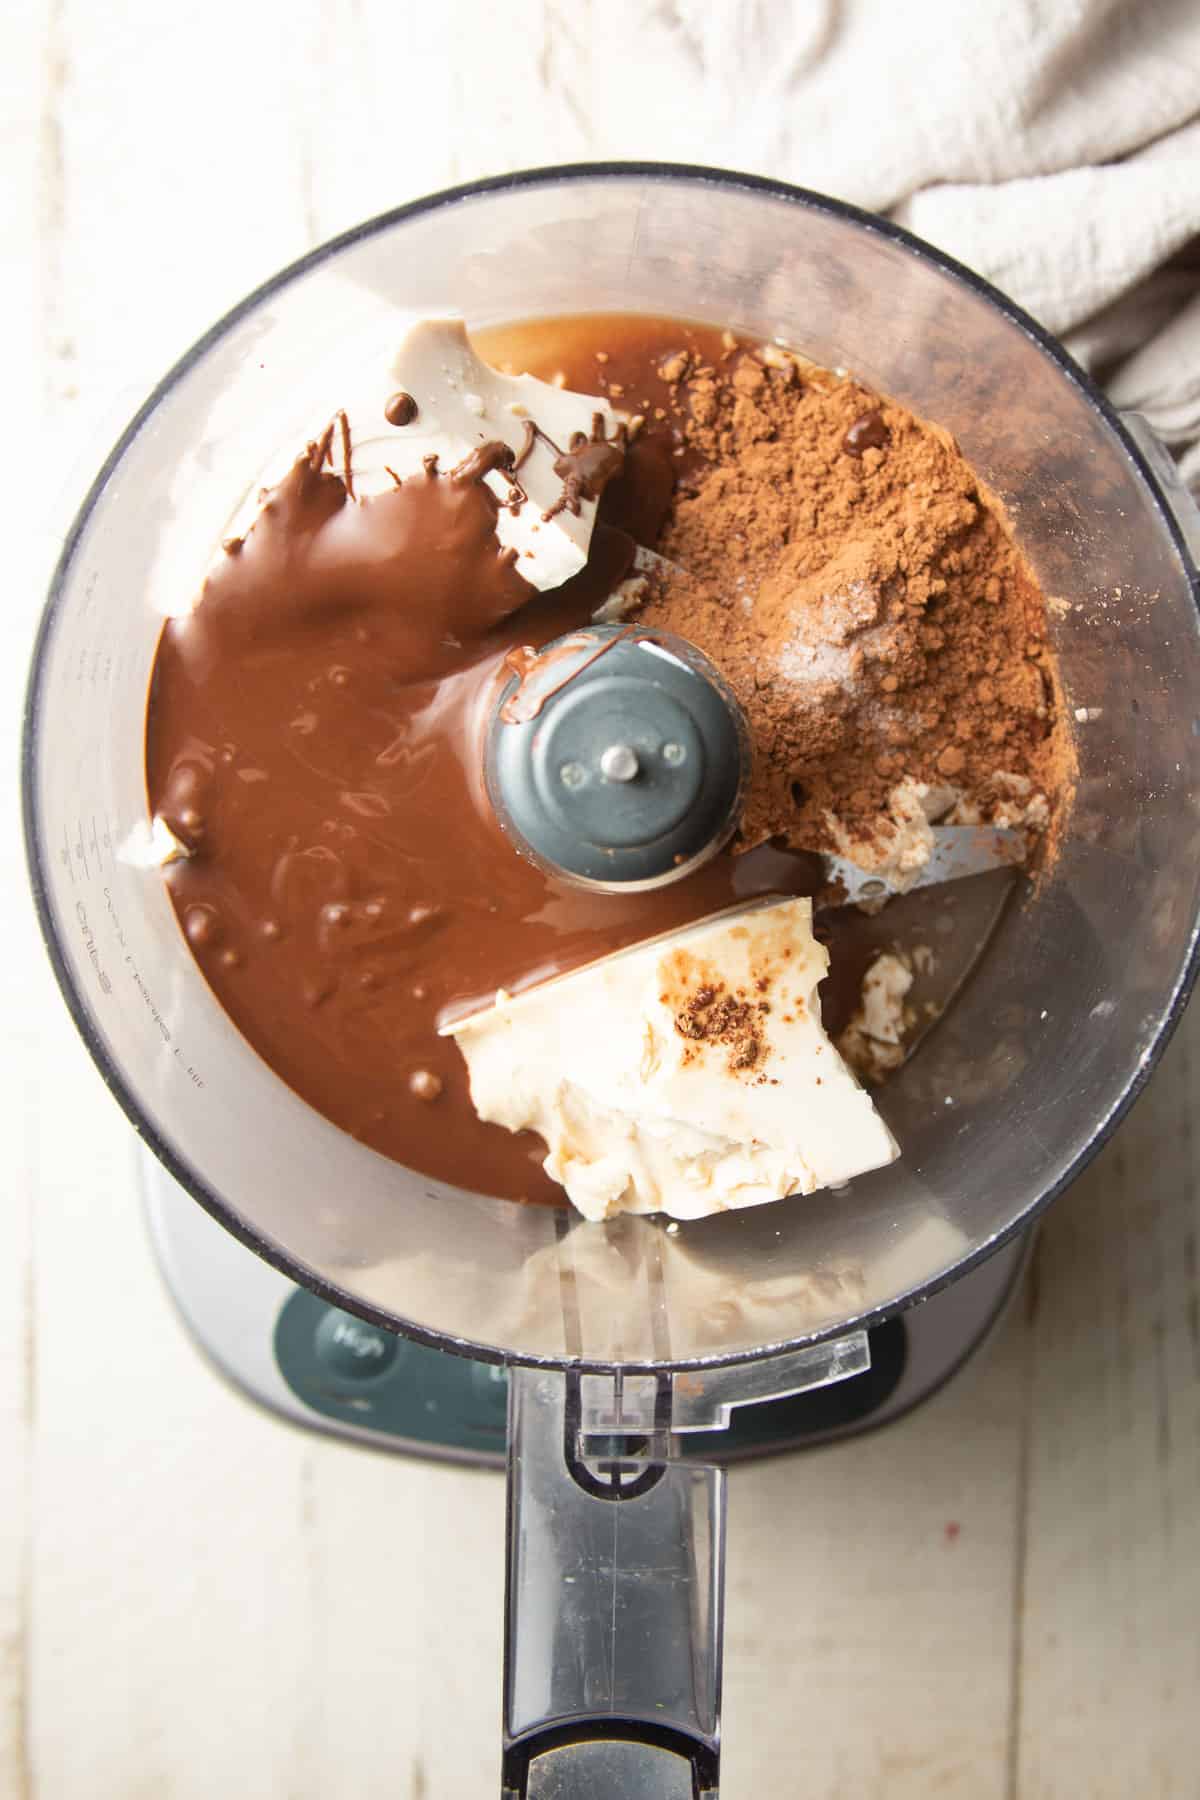 Ingredients for making Vegan Chocolate Pie filling in a food processor bowl.